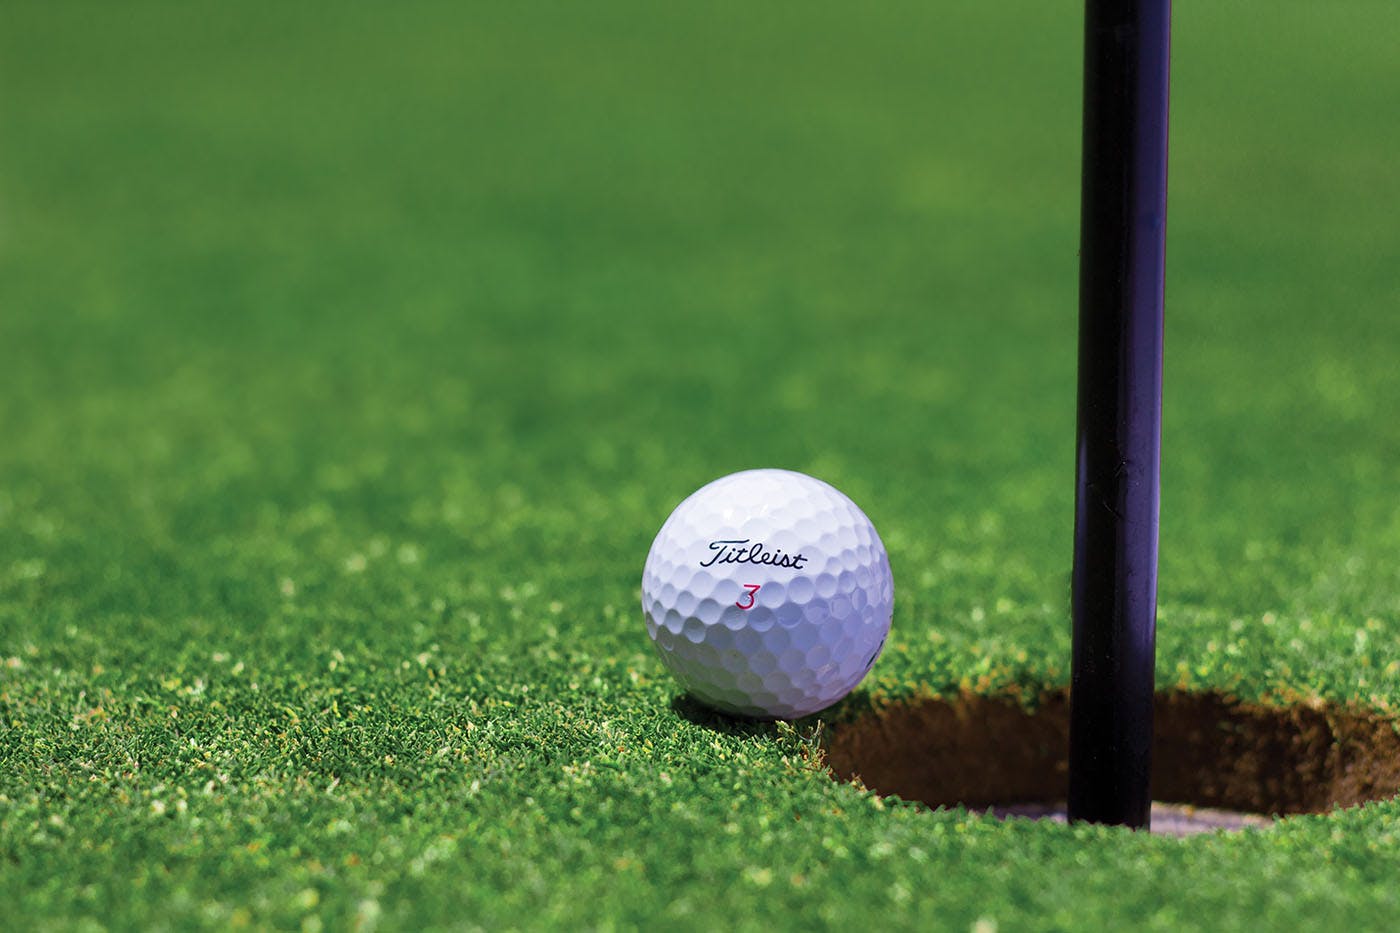 Golf ball just a second before it reaches the pothole. Photo by Steven Shircliff on Unsplash